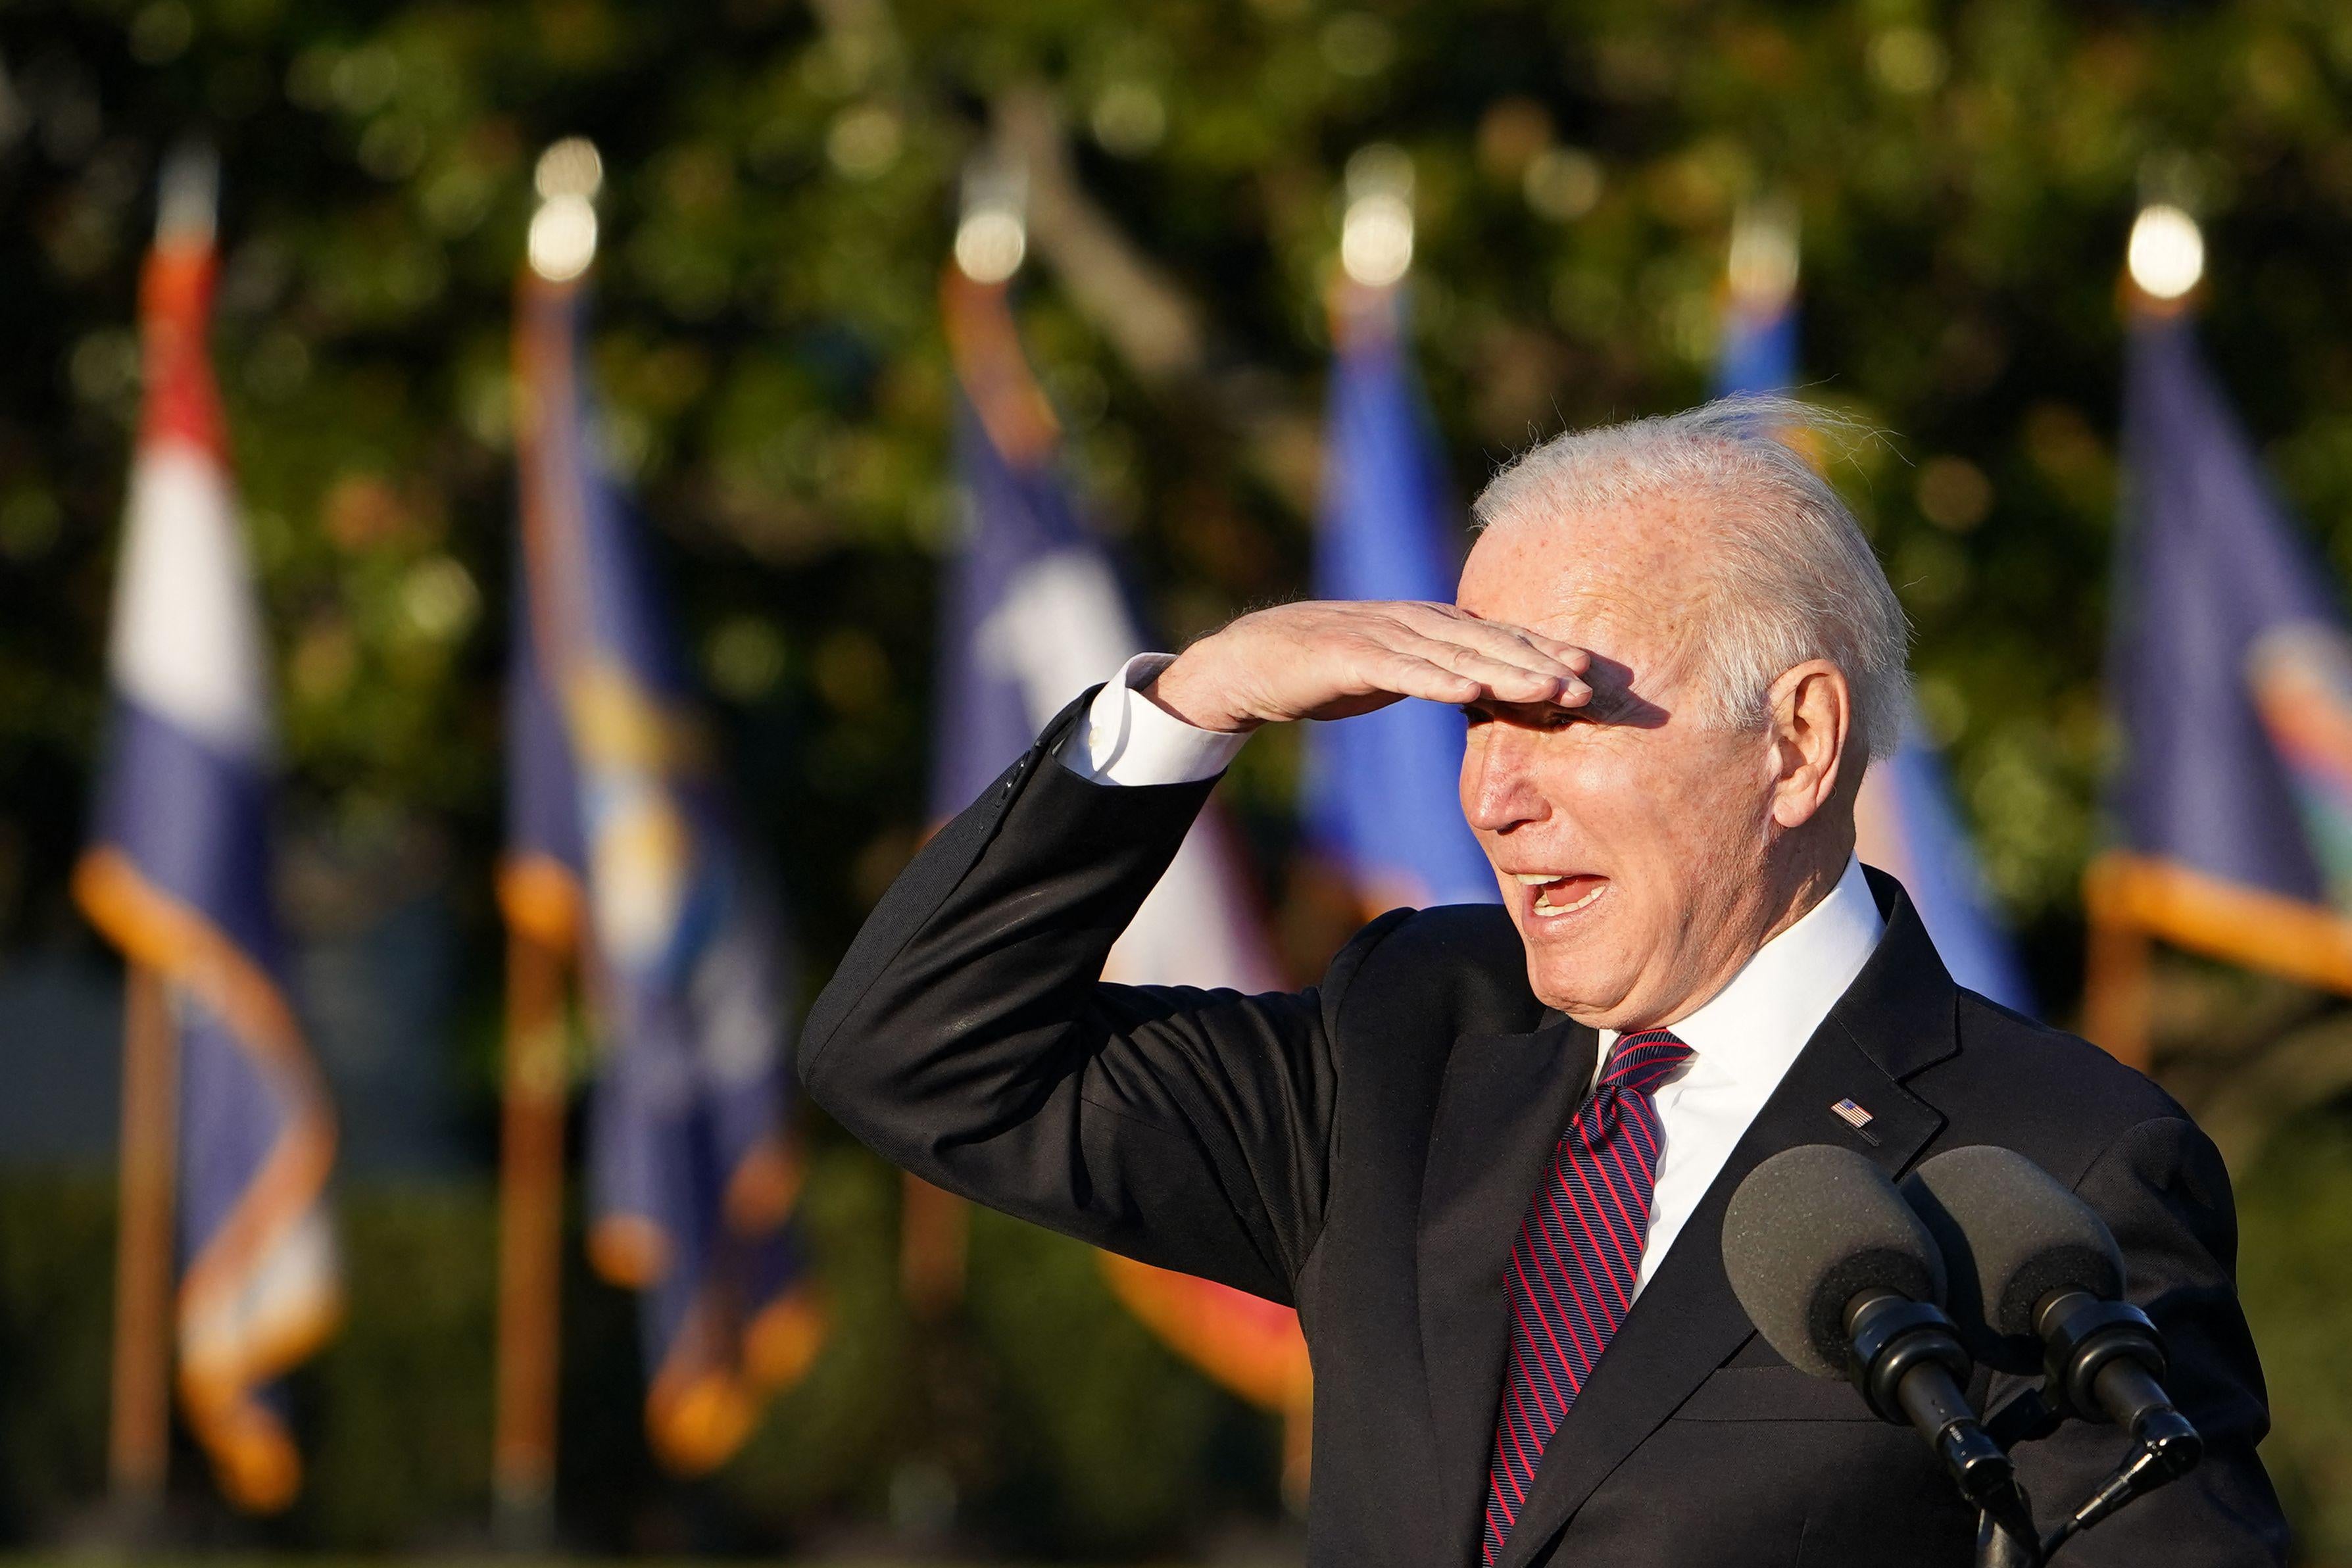 Joe Biden looks out at a crowd, shielding his eyes from the sun.